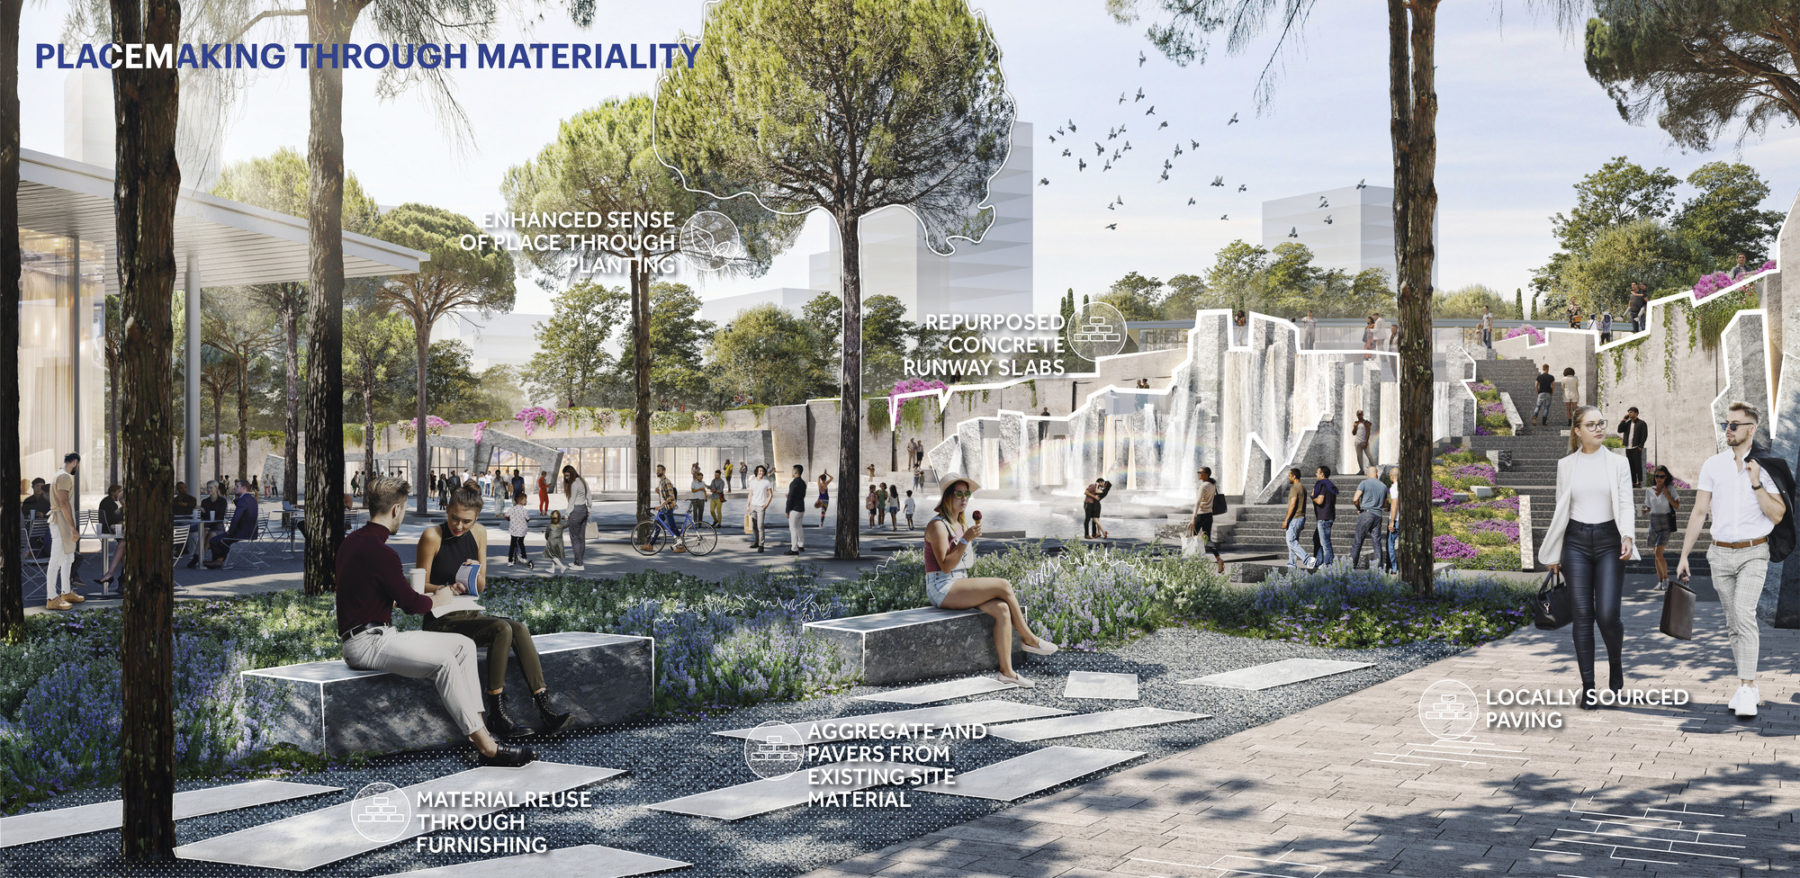 Rendering of a section of the park with callouts of the materials. Image title reads 